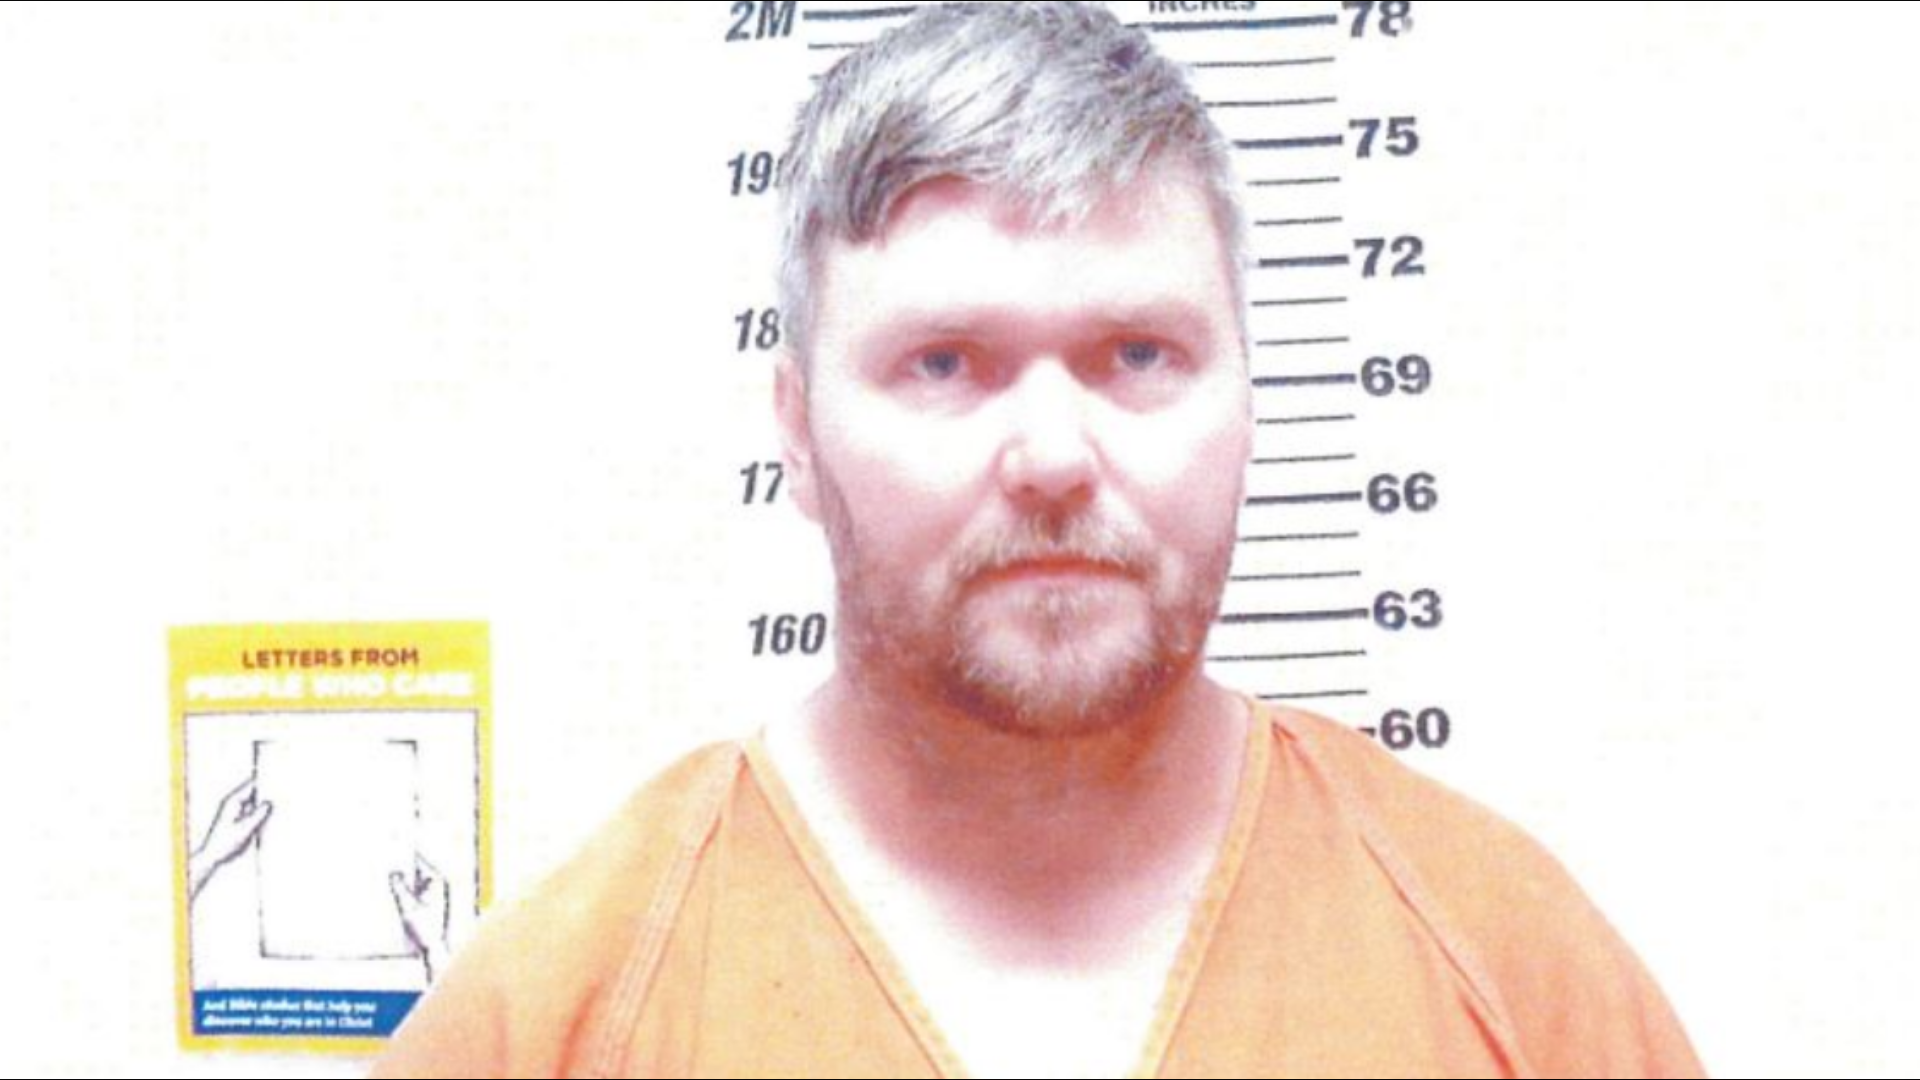 According to the Mitchell County Sheriff's Office, Adkins was released from the Mitchell County Jail on Tuesday morning.